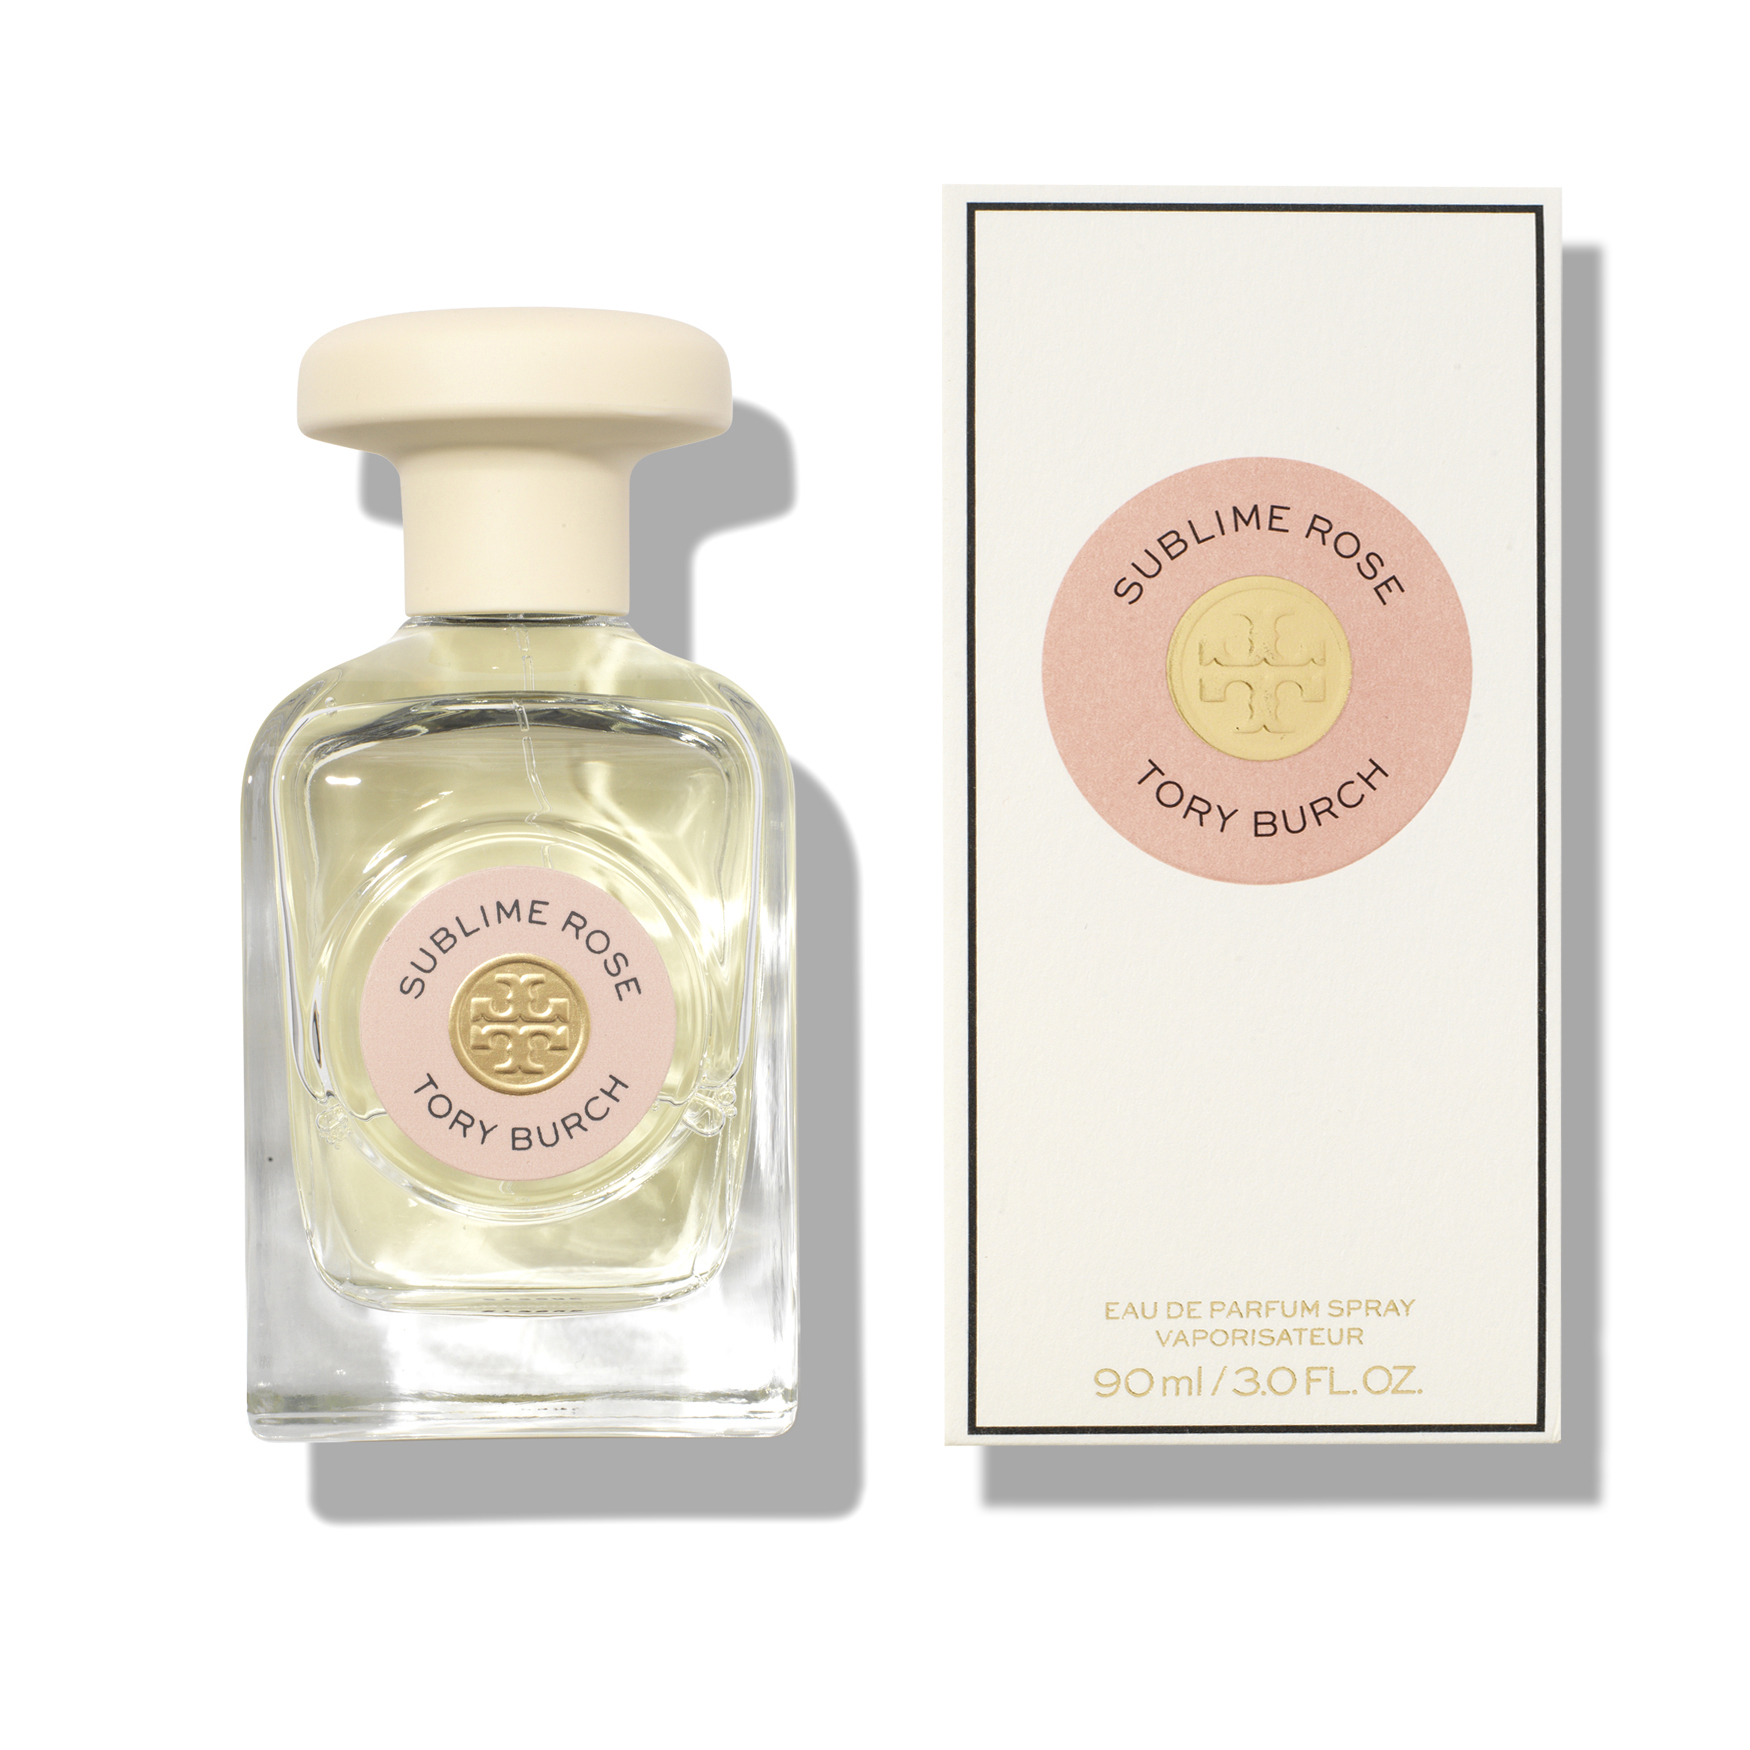 Tory Burch Essence of Dreams Sublime Rose Review